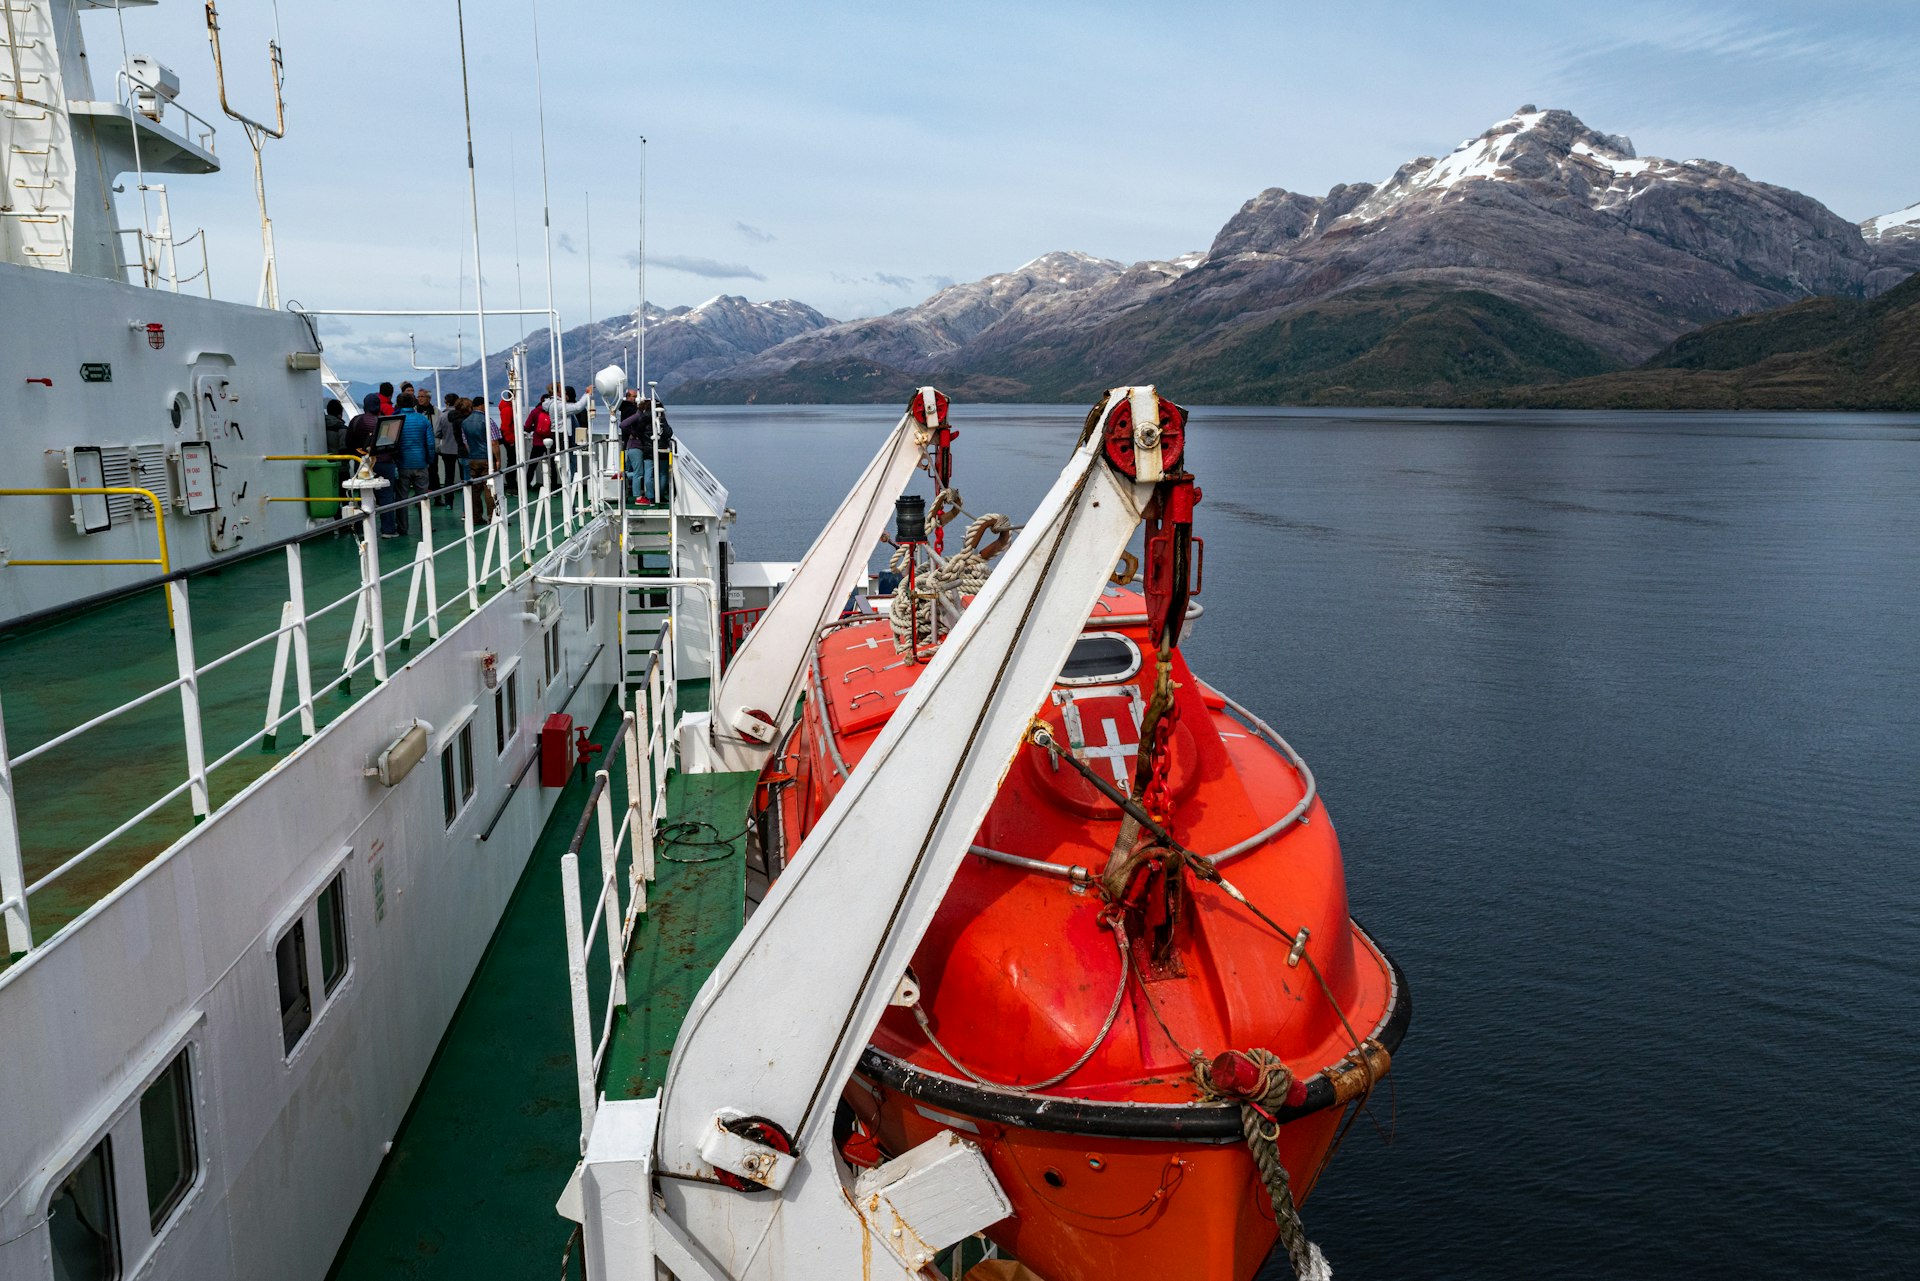 A cruise ship in fjords with passengers at the front enjoying the scenery